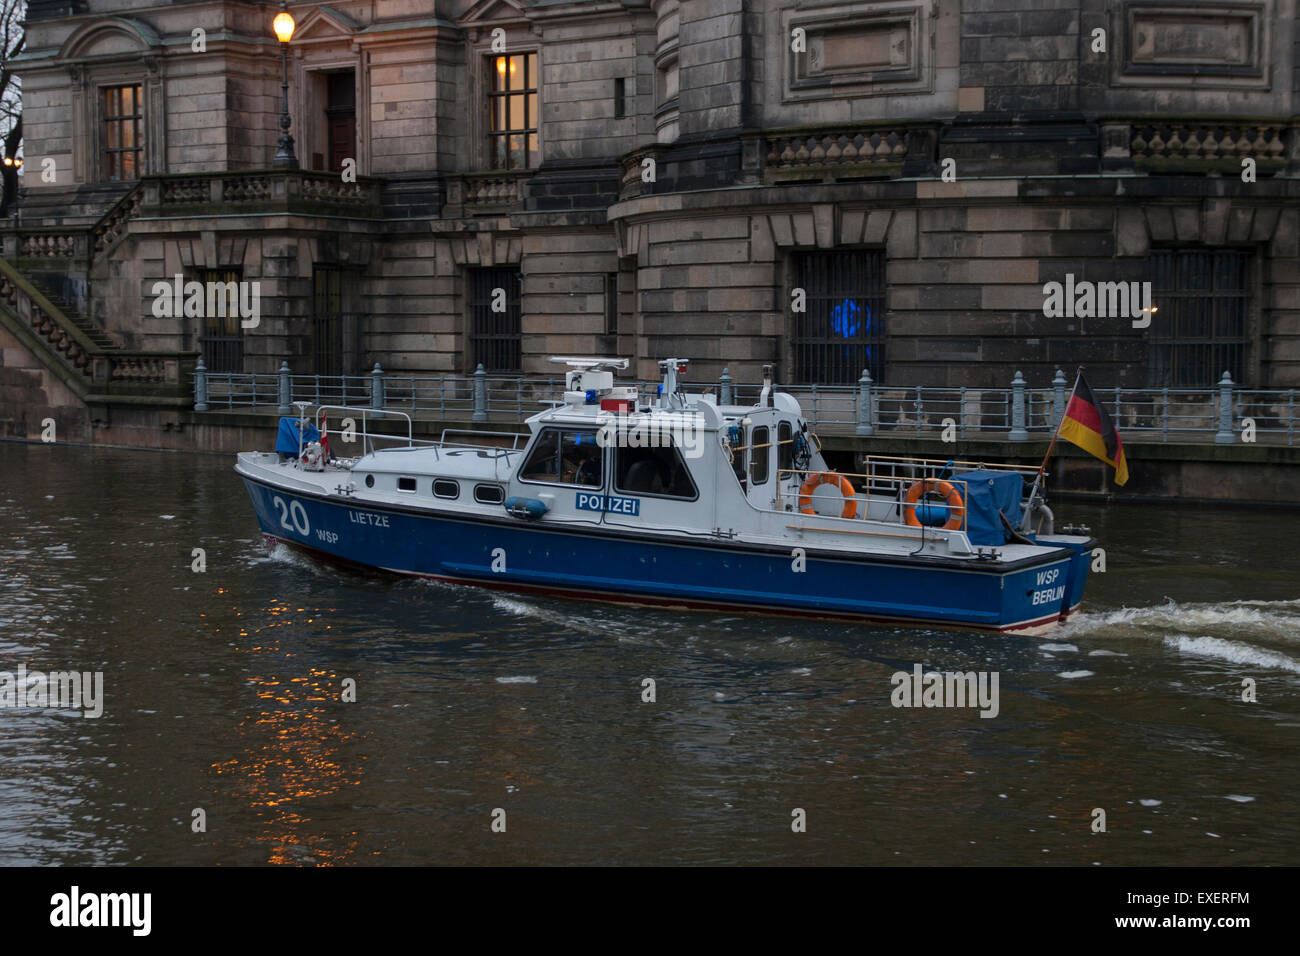 Police boat on a River in Berlin, Germany. Stock Photo